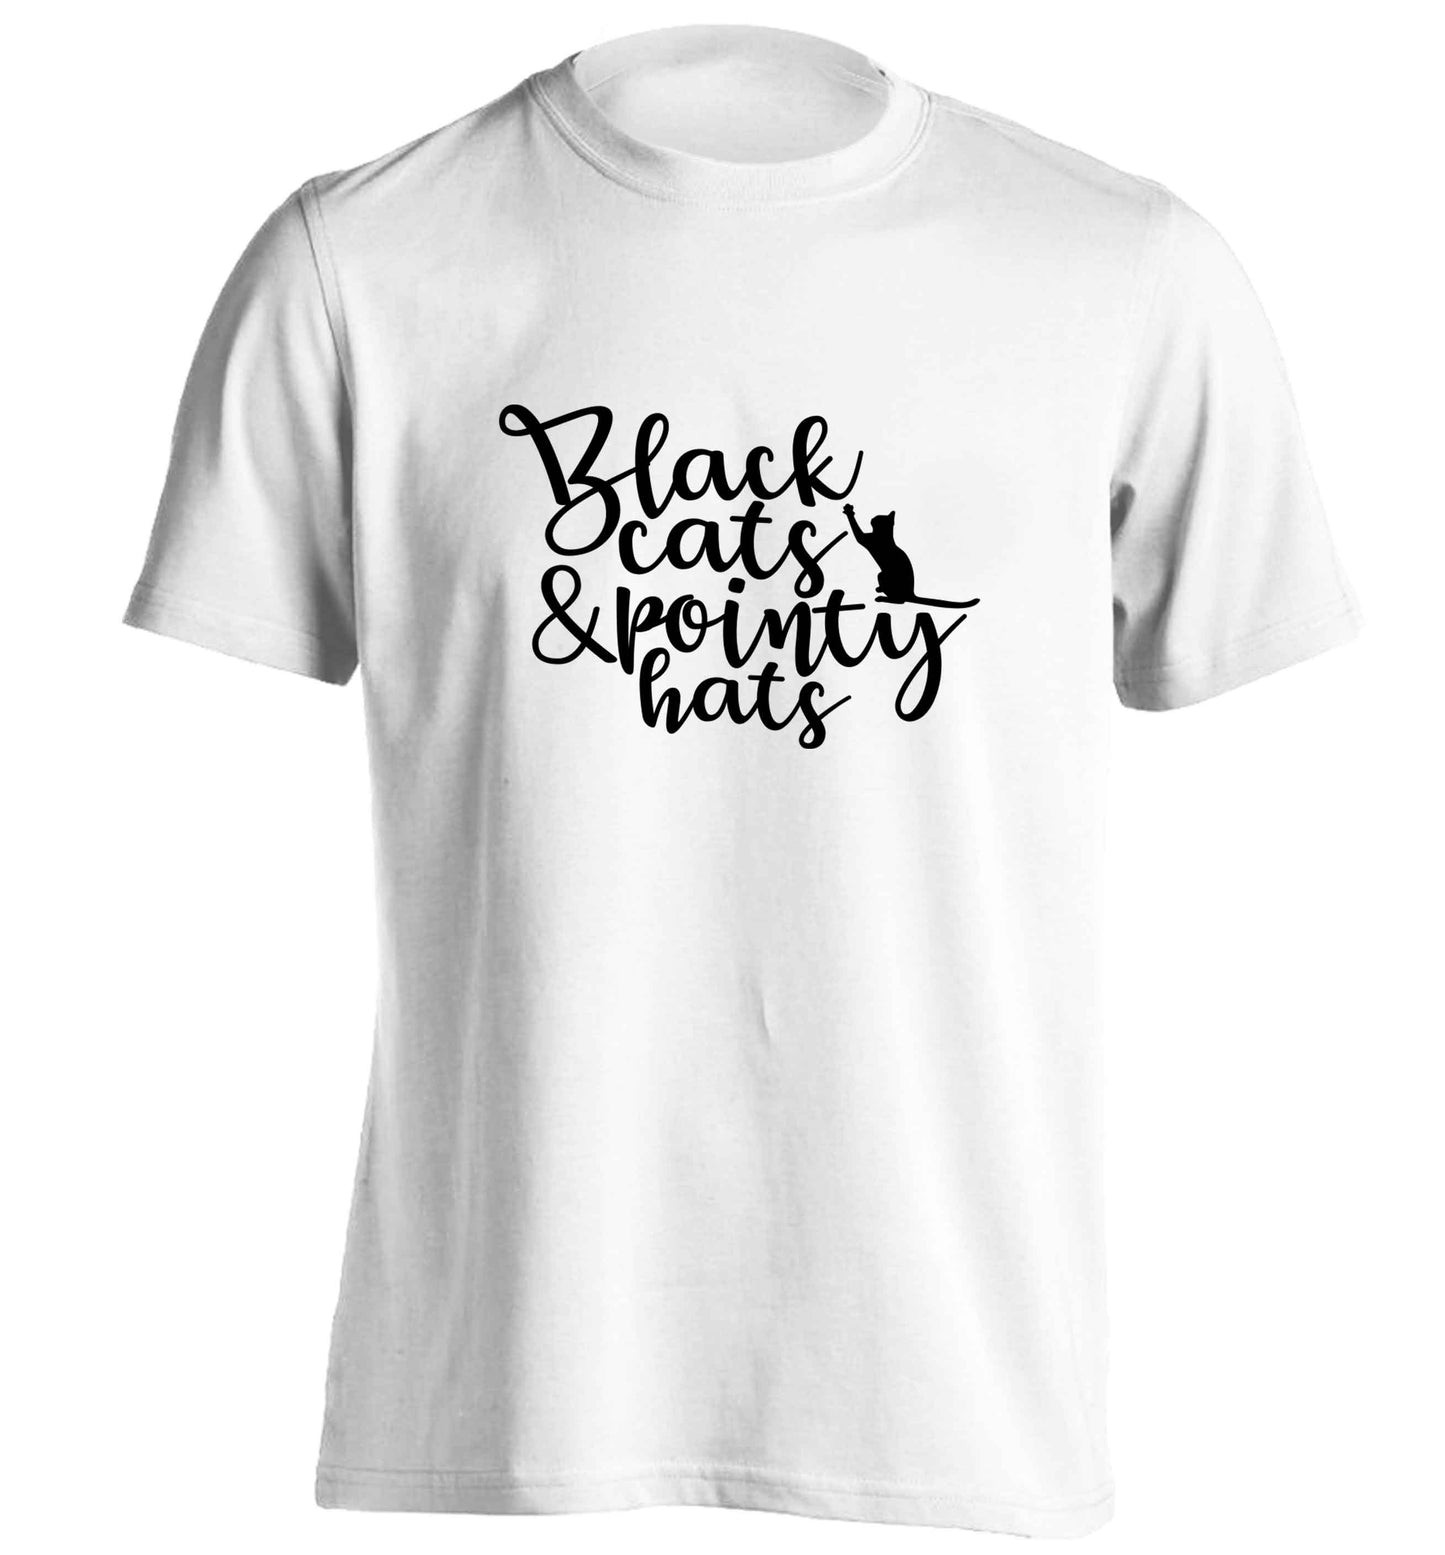 Black cats and pointy hats adults unisex white Tshirt 2XL